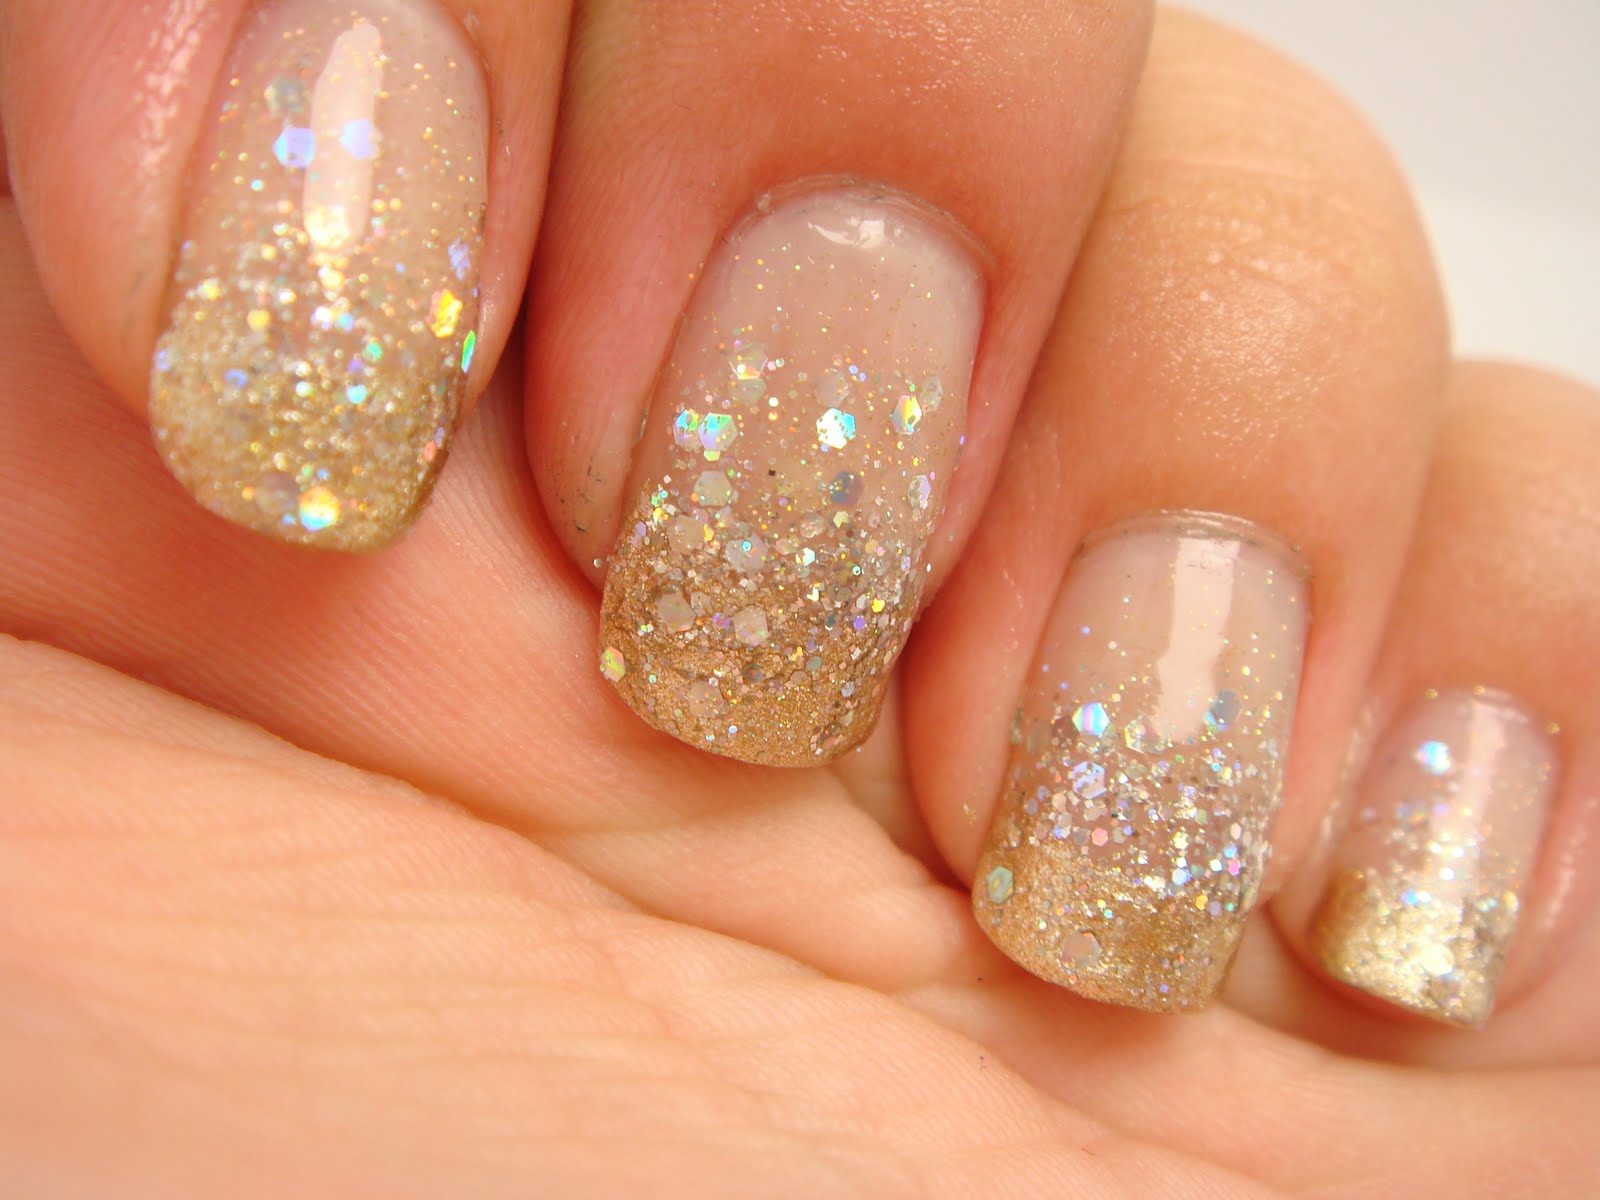 Gallery of gold nail designs.